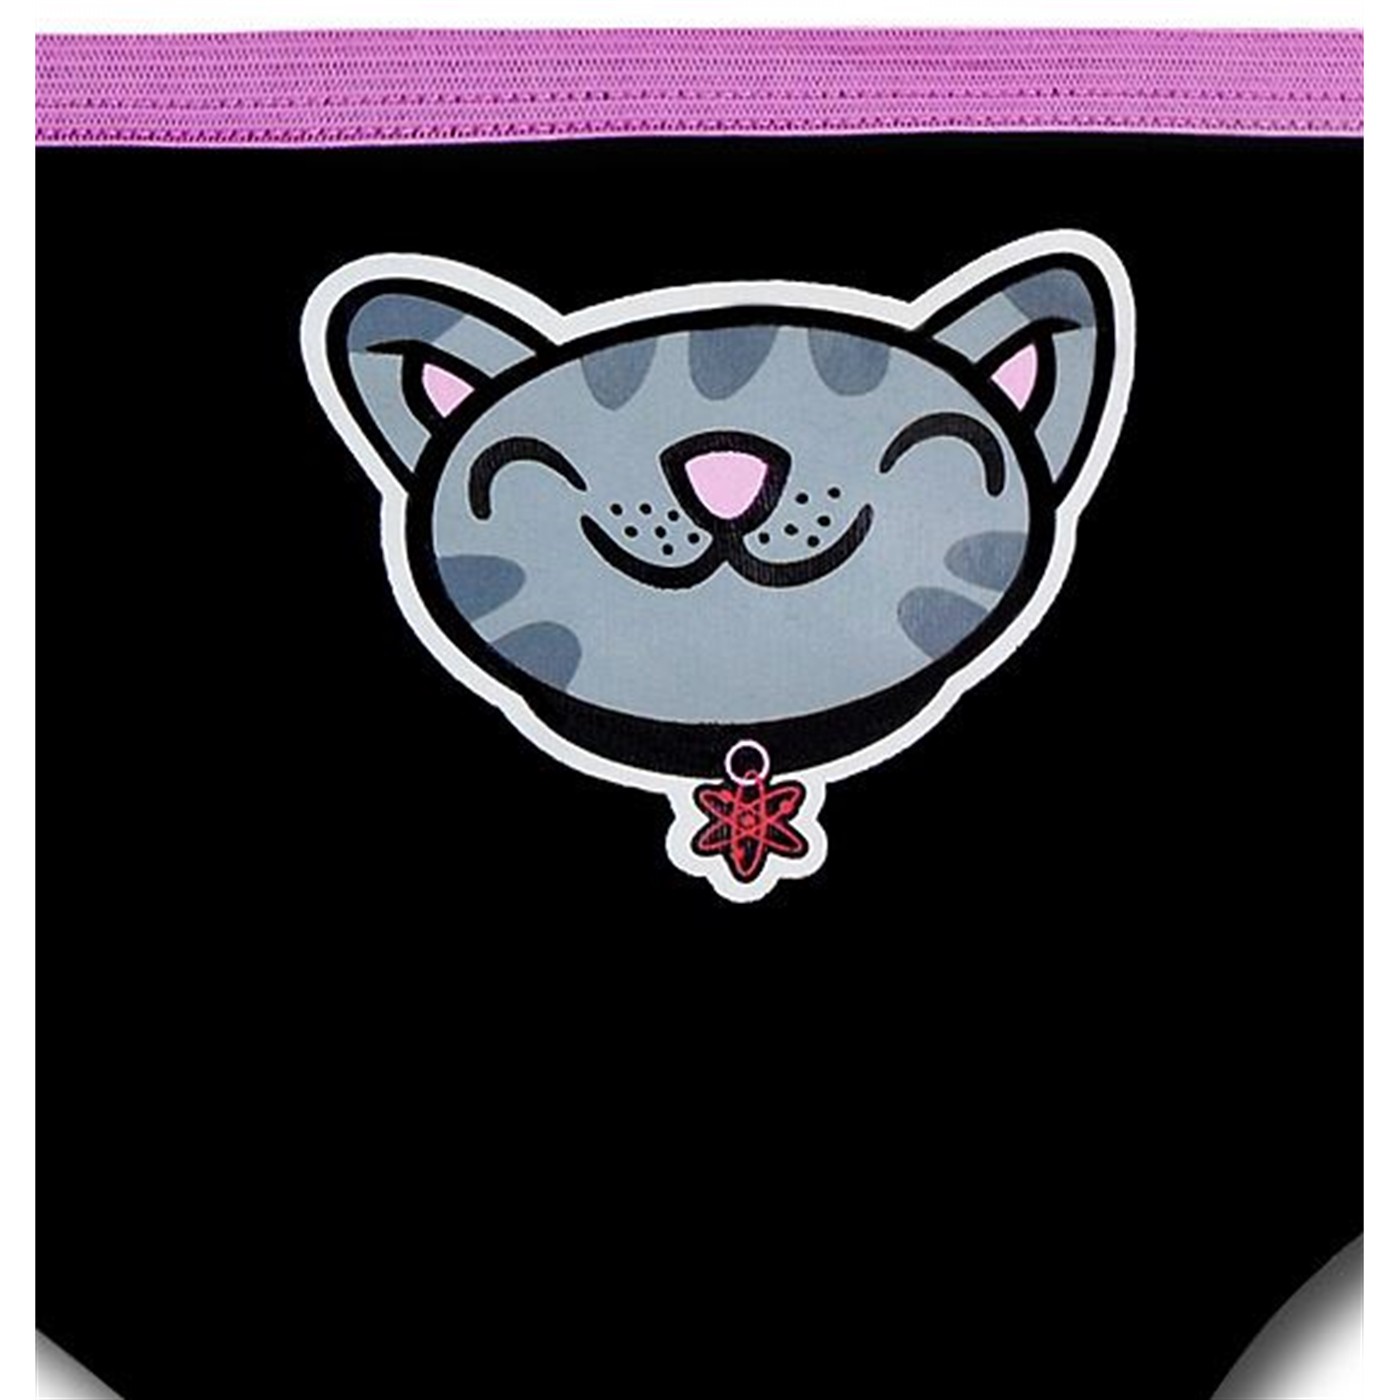 Big Bang Theory Soft Kitty Women's Hipster Briefs 3-Pack